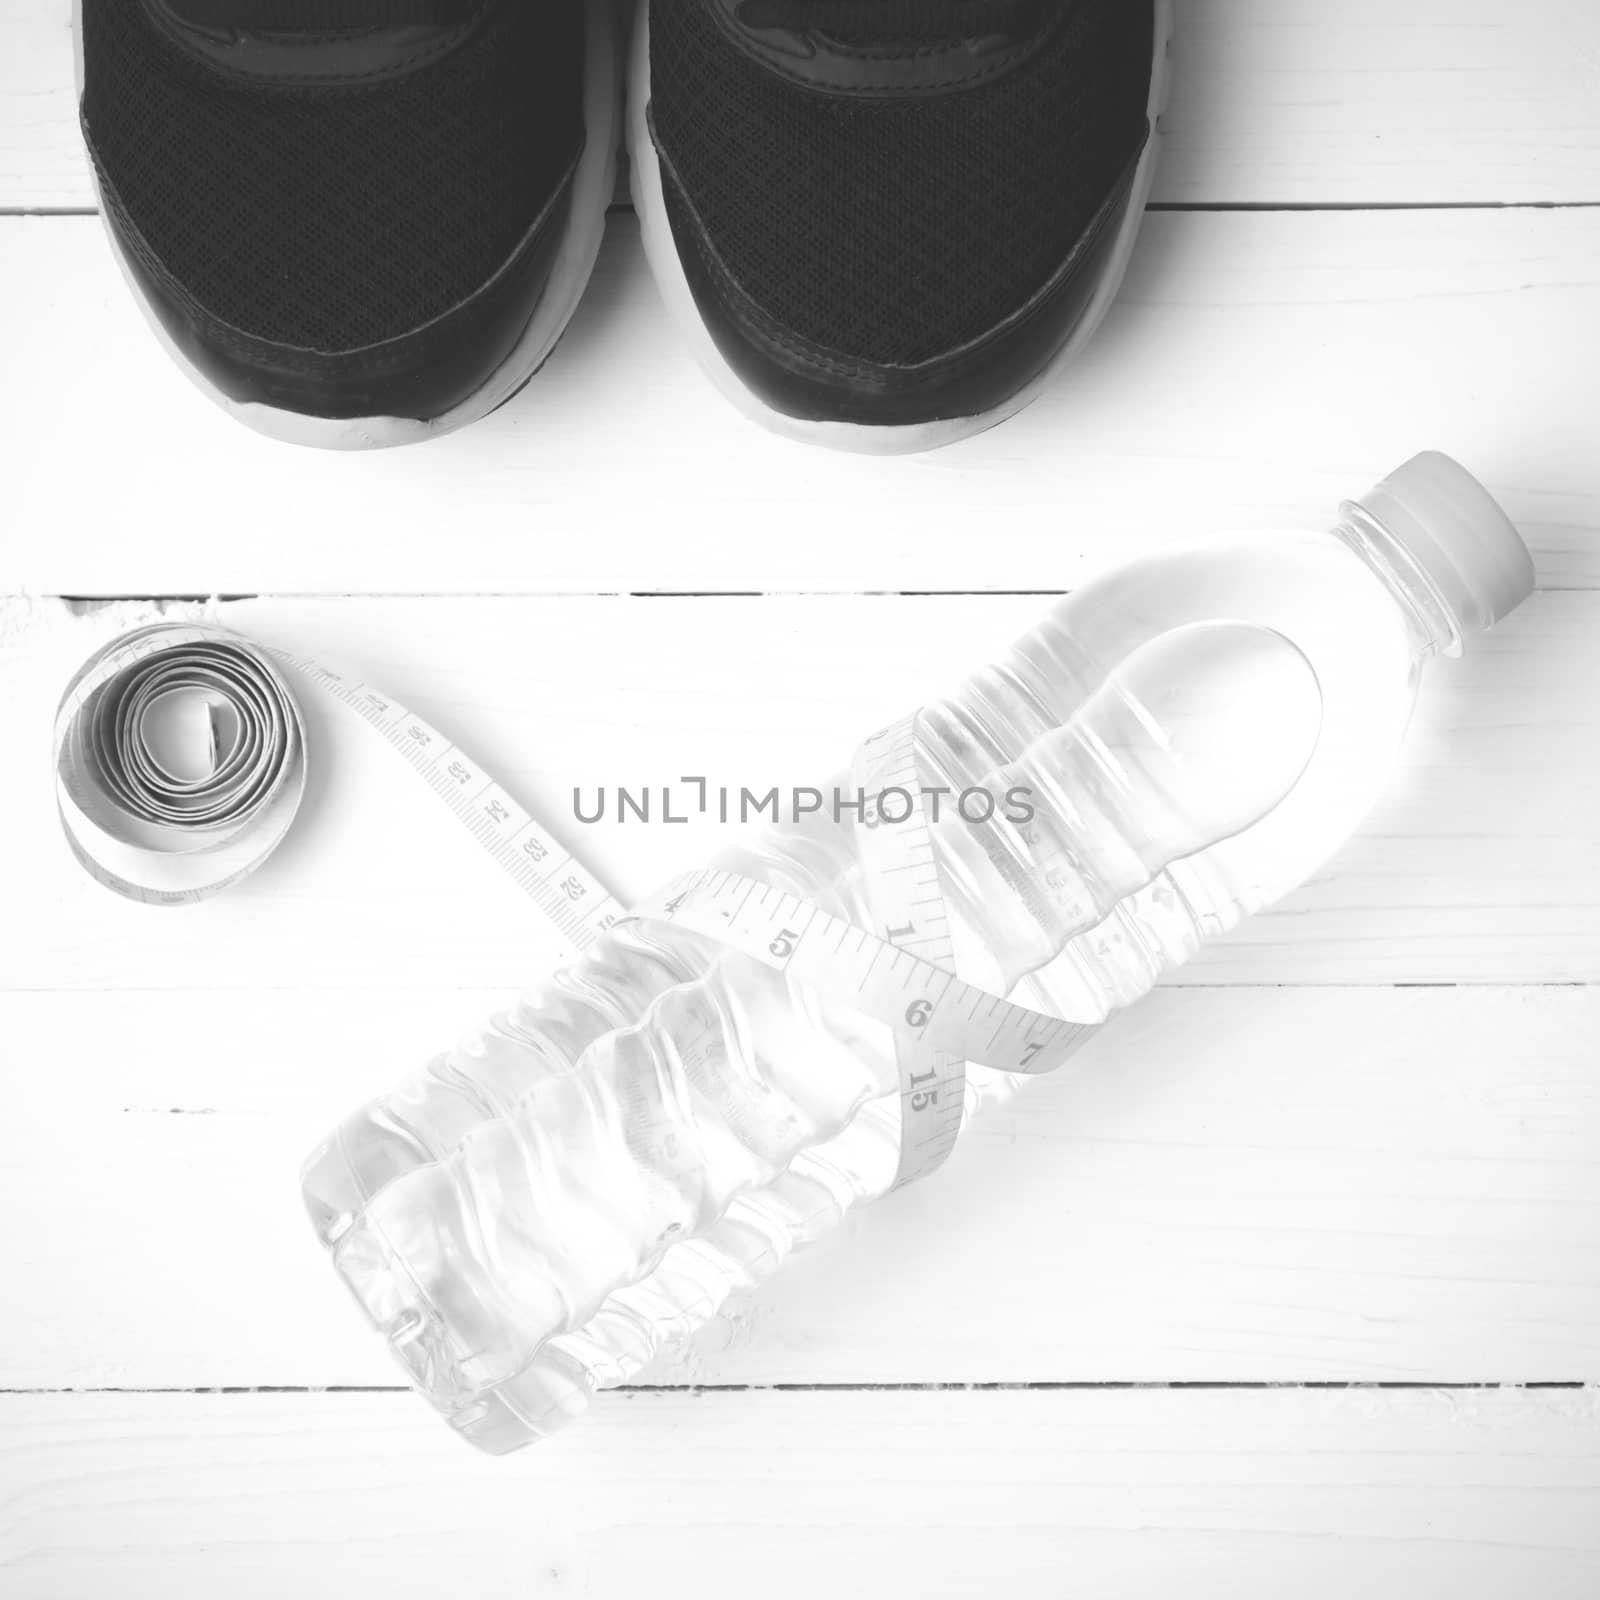 fitness equipment : running shoes,drinking water and measuring tape on white wood table black and white tone color style